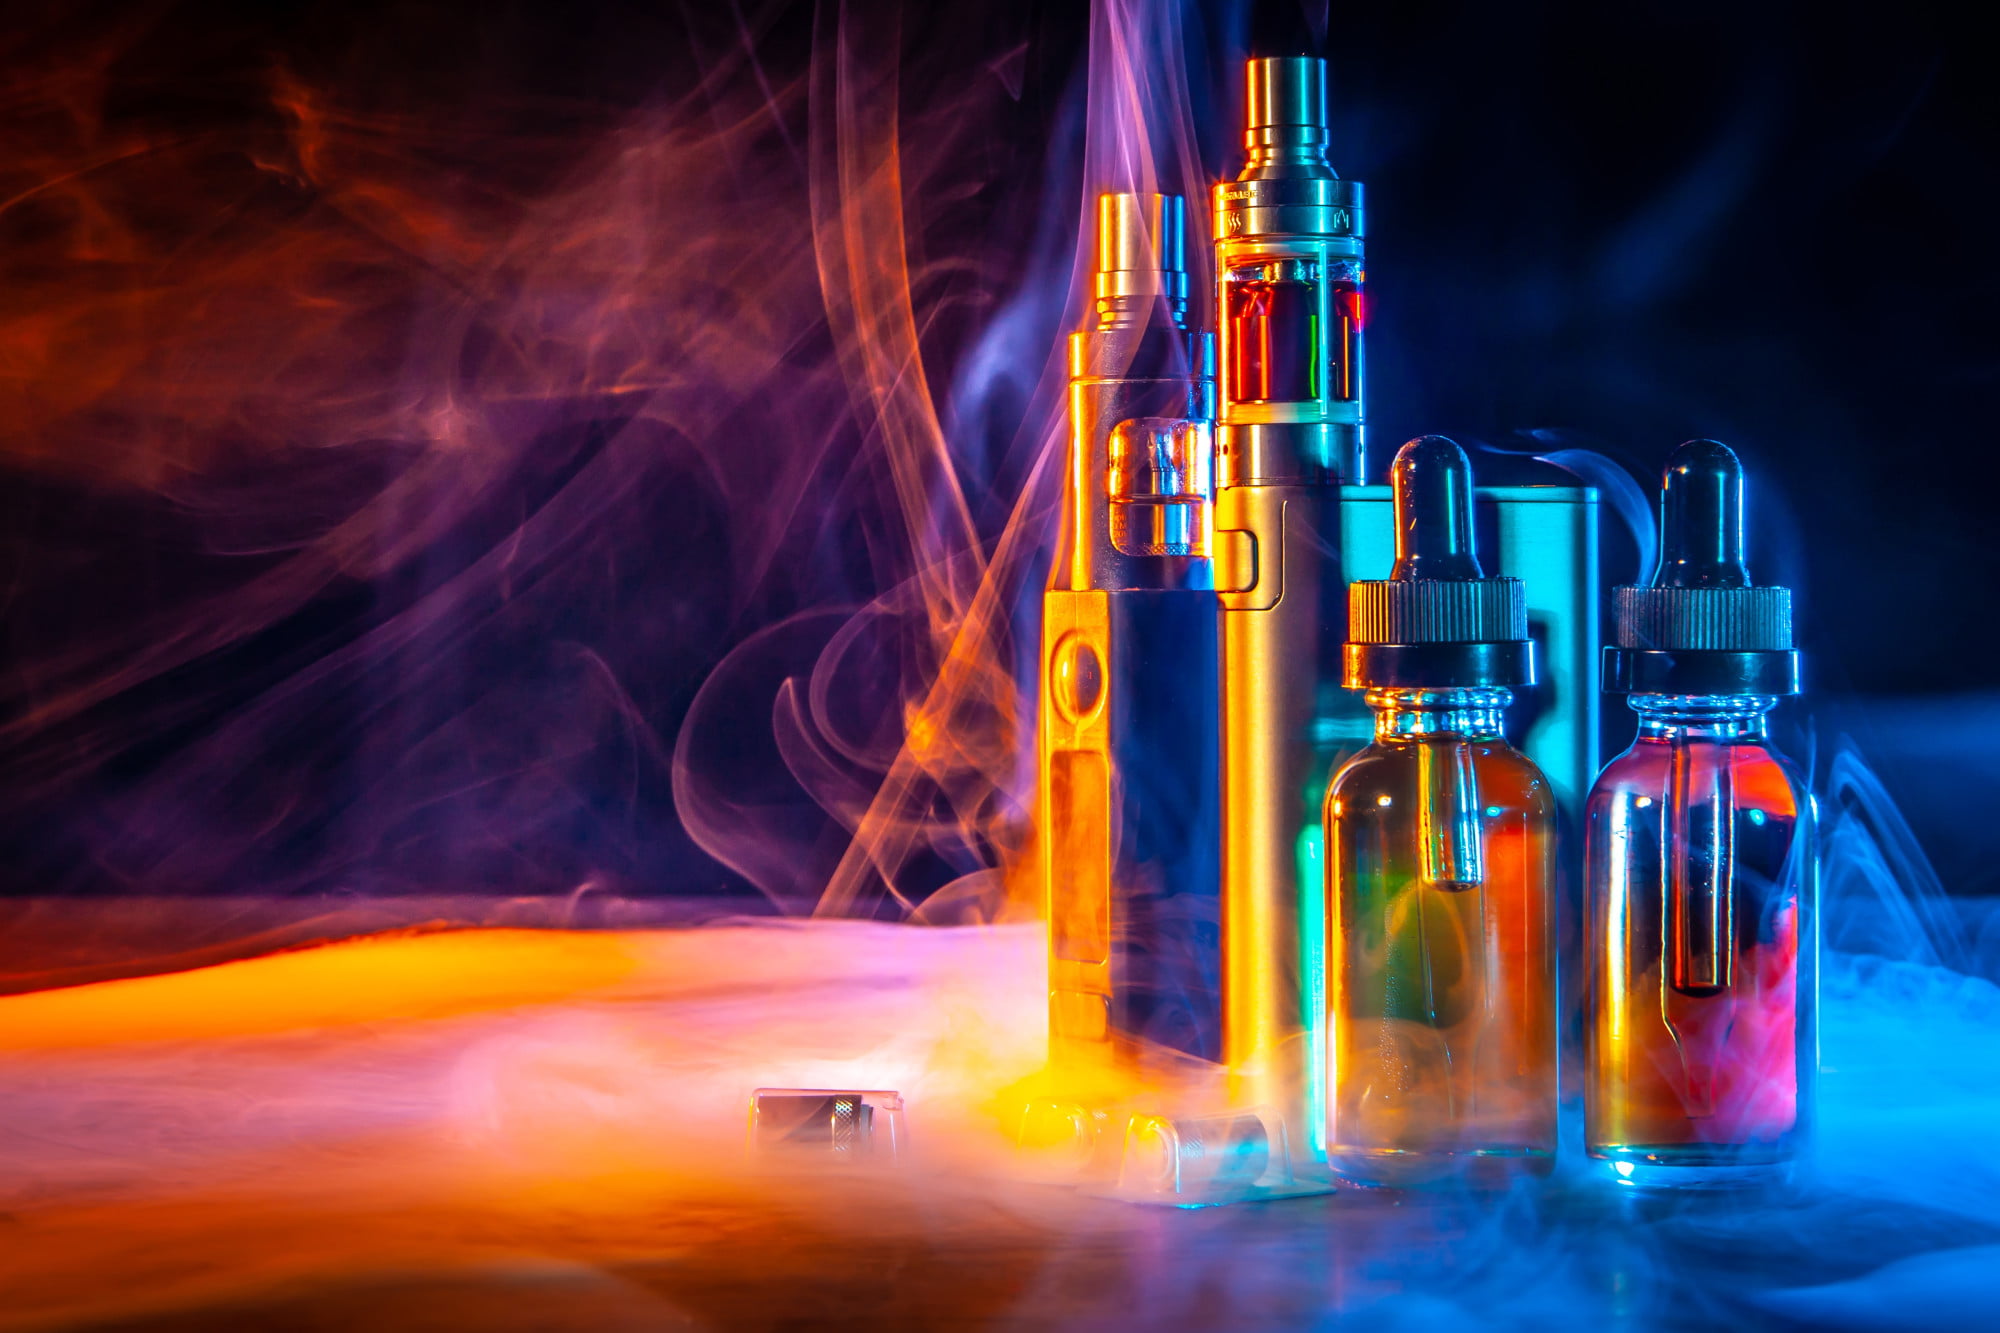 There are several types of vapes that you have to choose from. Find the right one for you by checking out this informative guide.